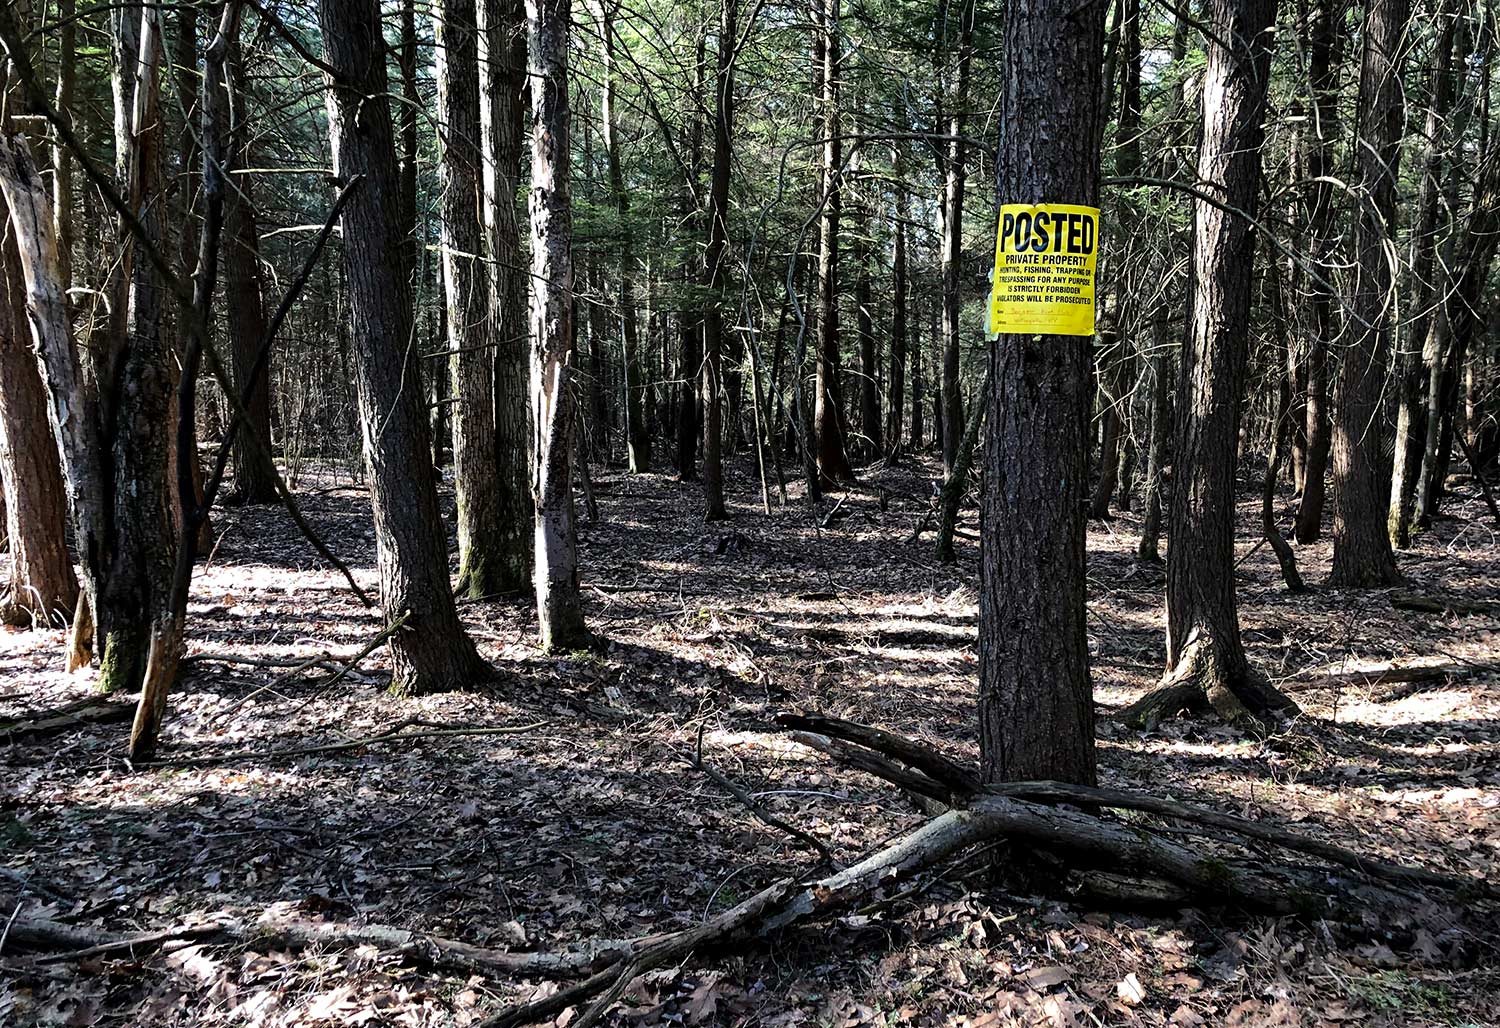 Landscape photograph of a forest with a private property sign hanging on a tree.